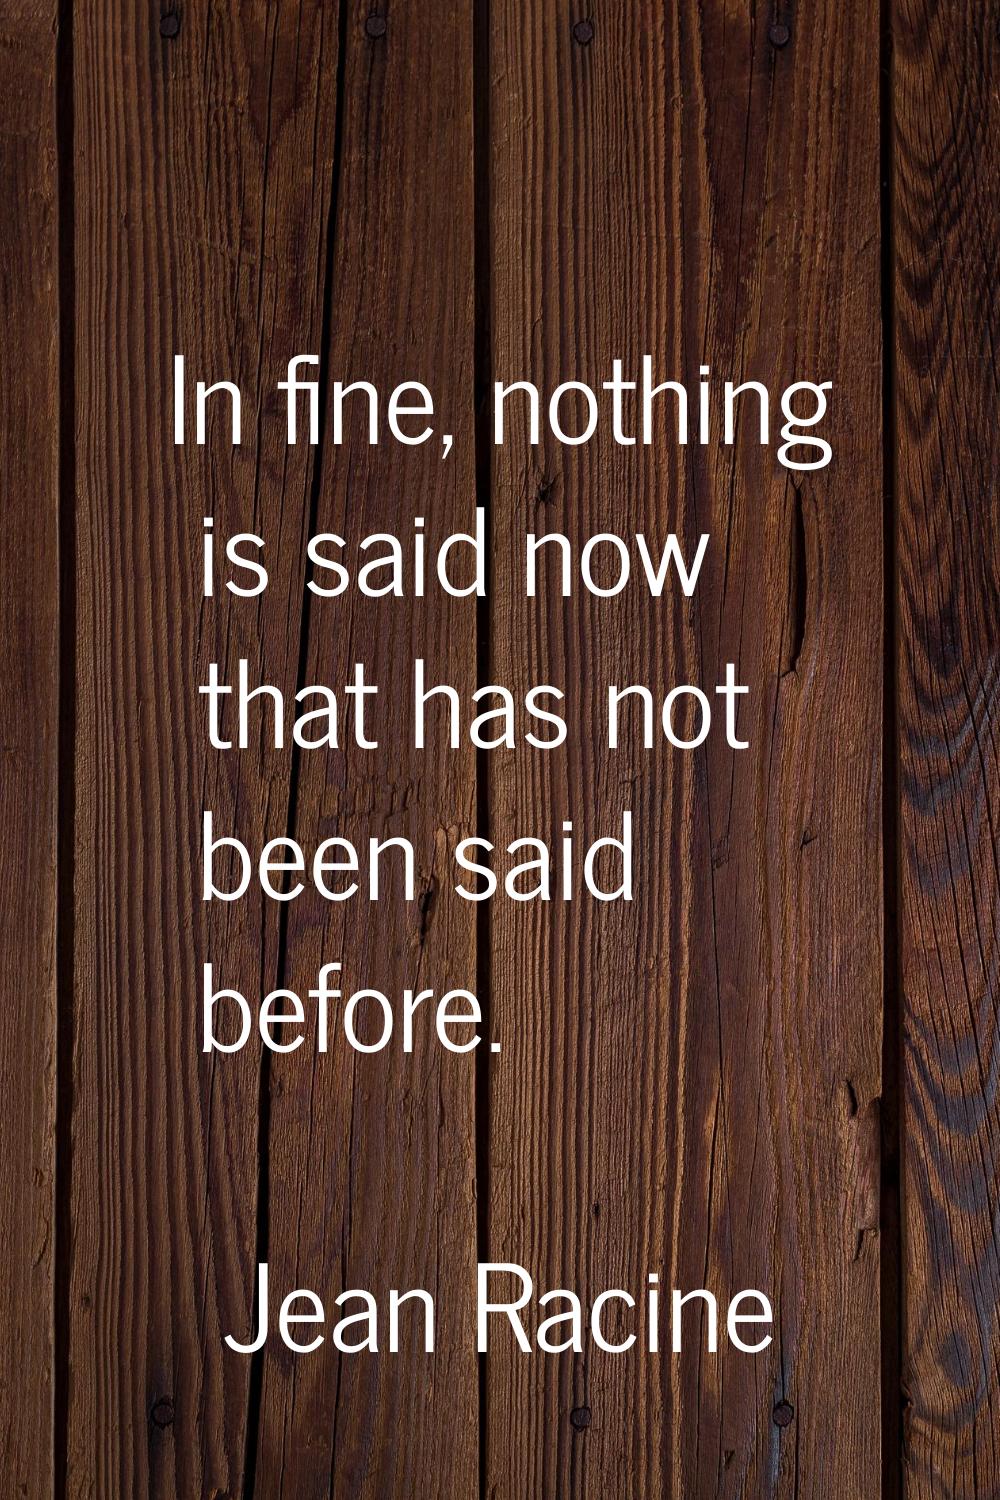 In fine, nothing is said now that has not been said before.